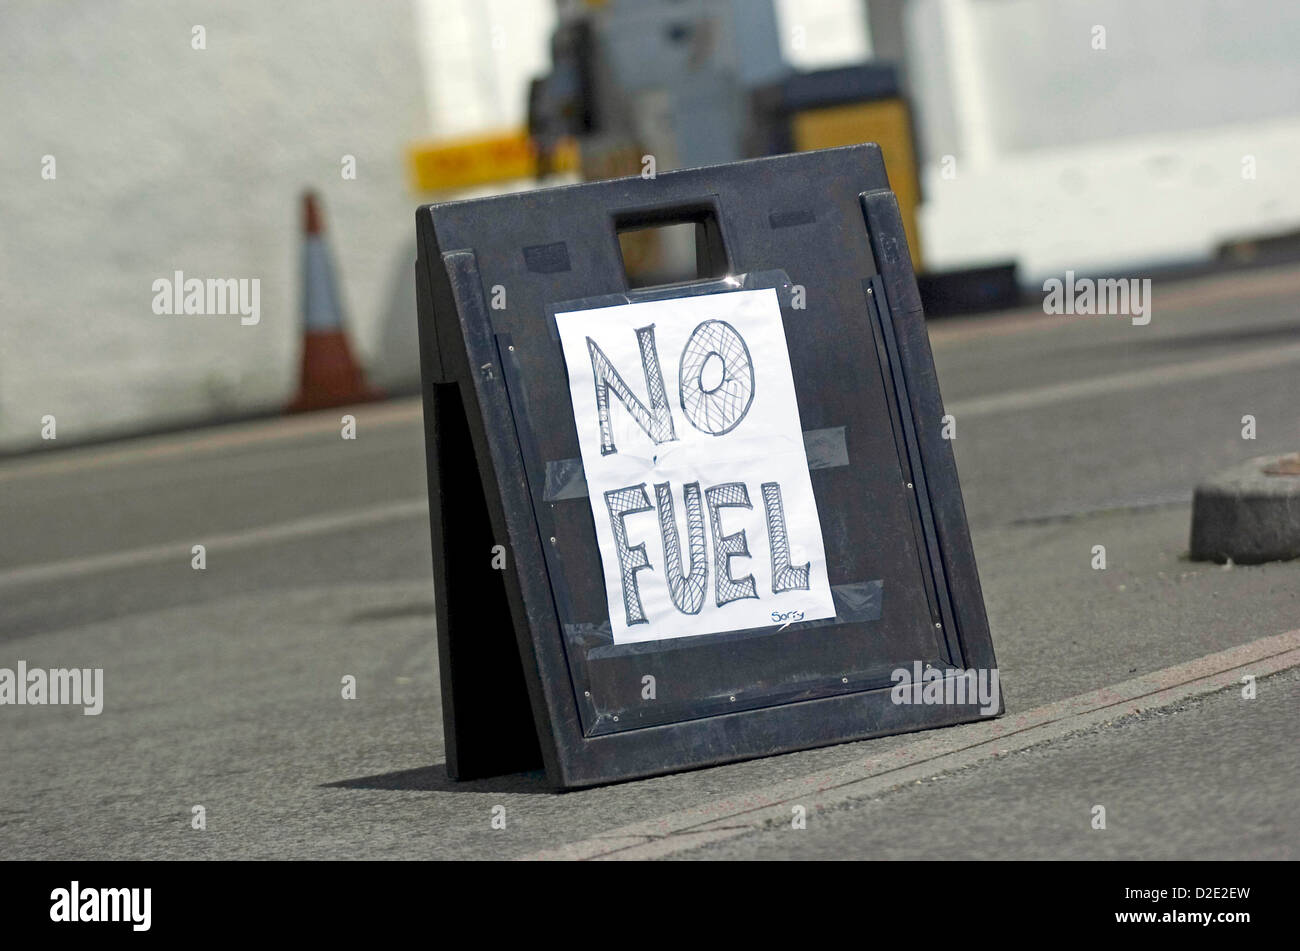 No fuel sign outside a petrol station in Swansea, UK. Stock Photo